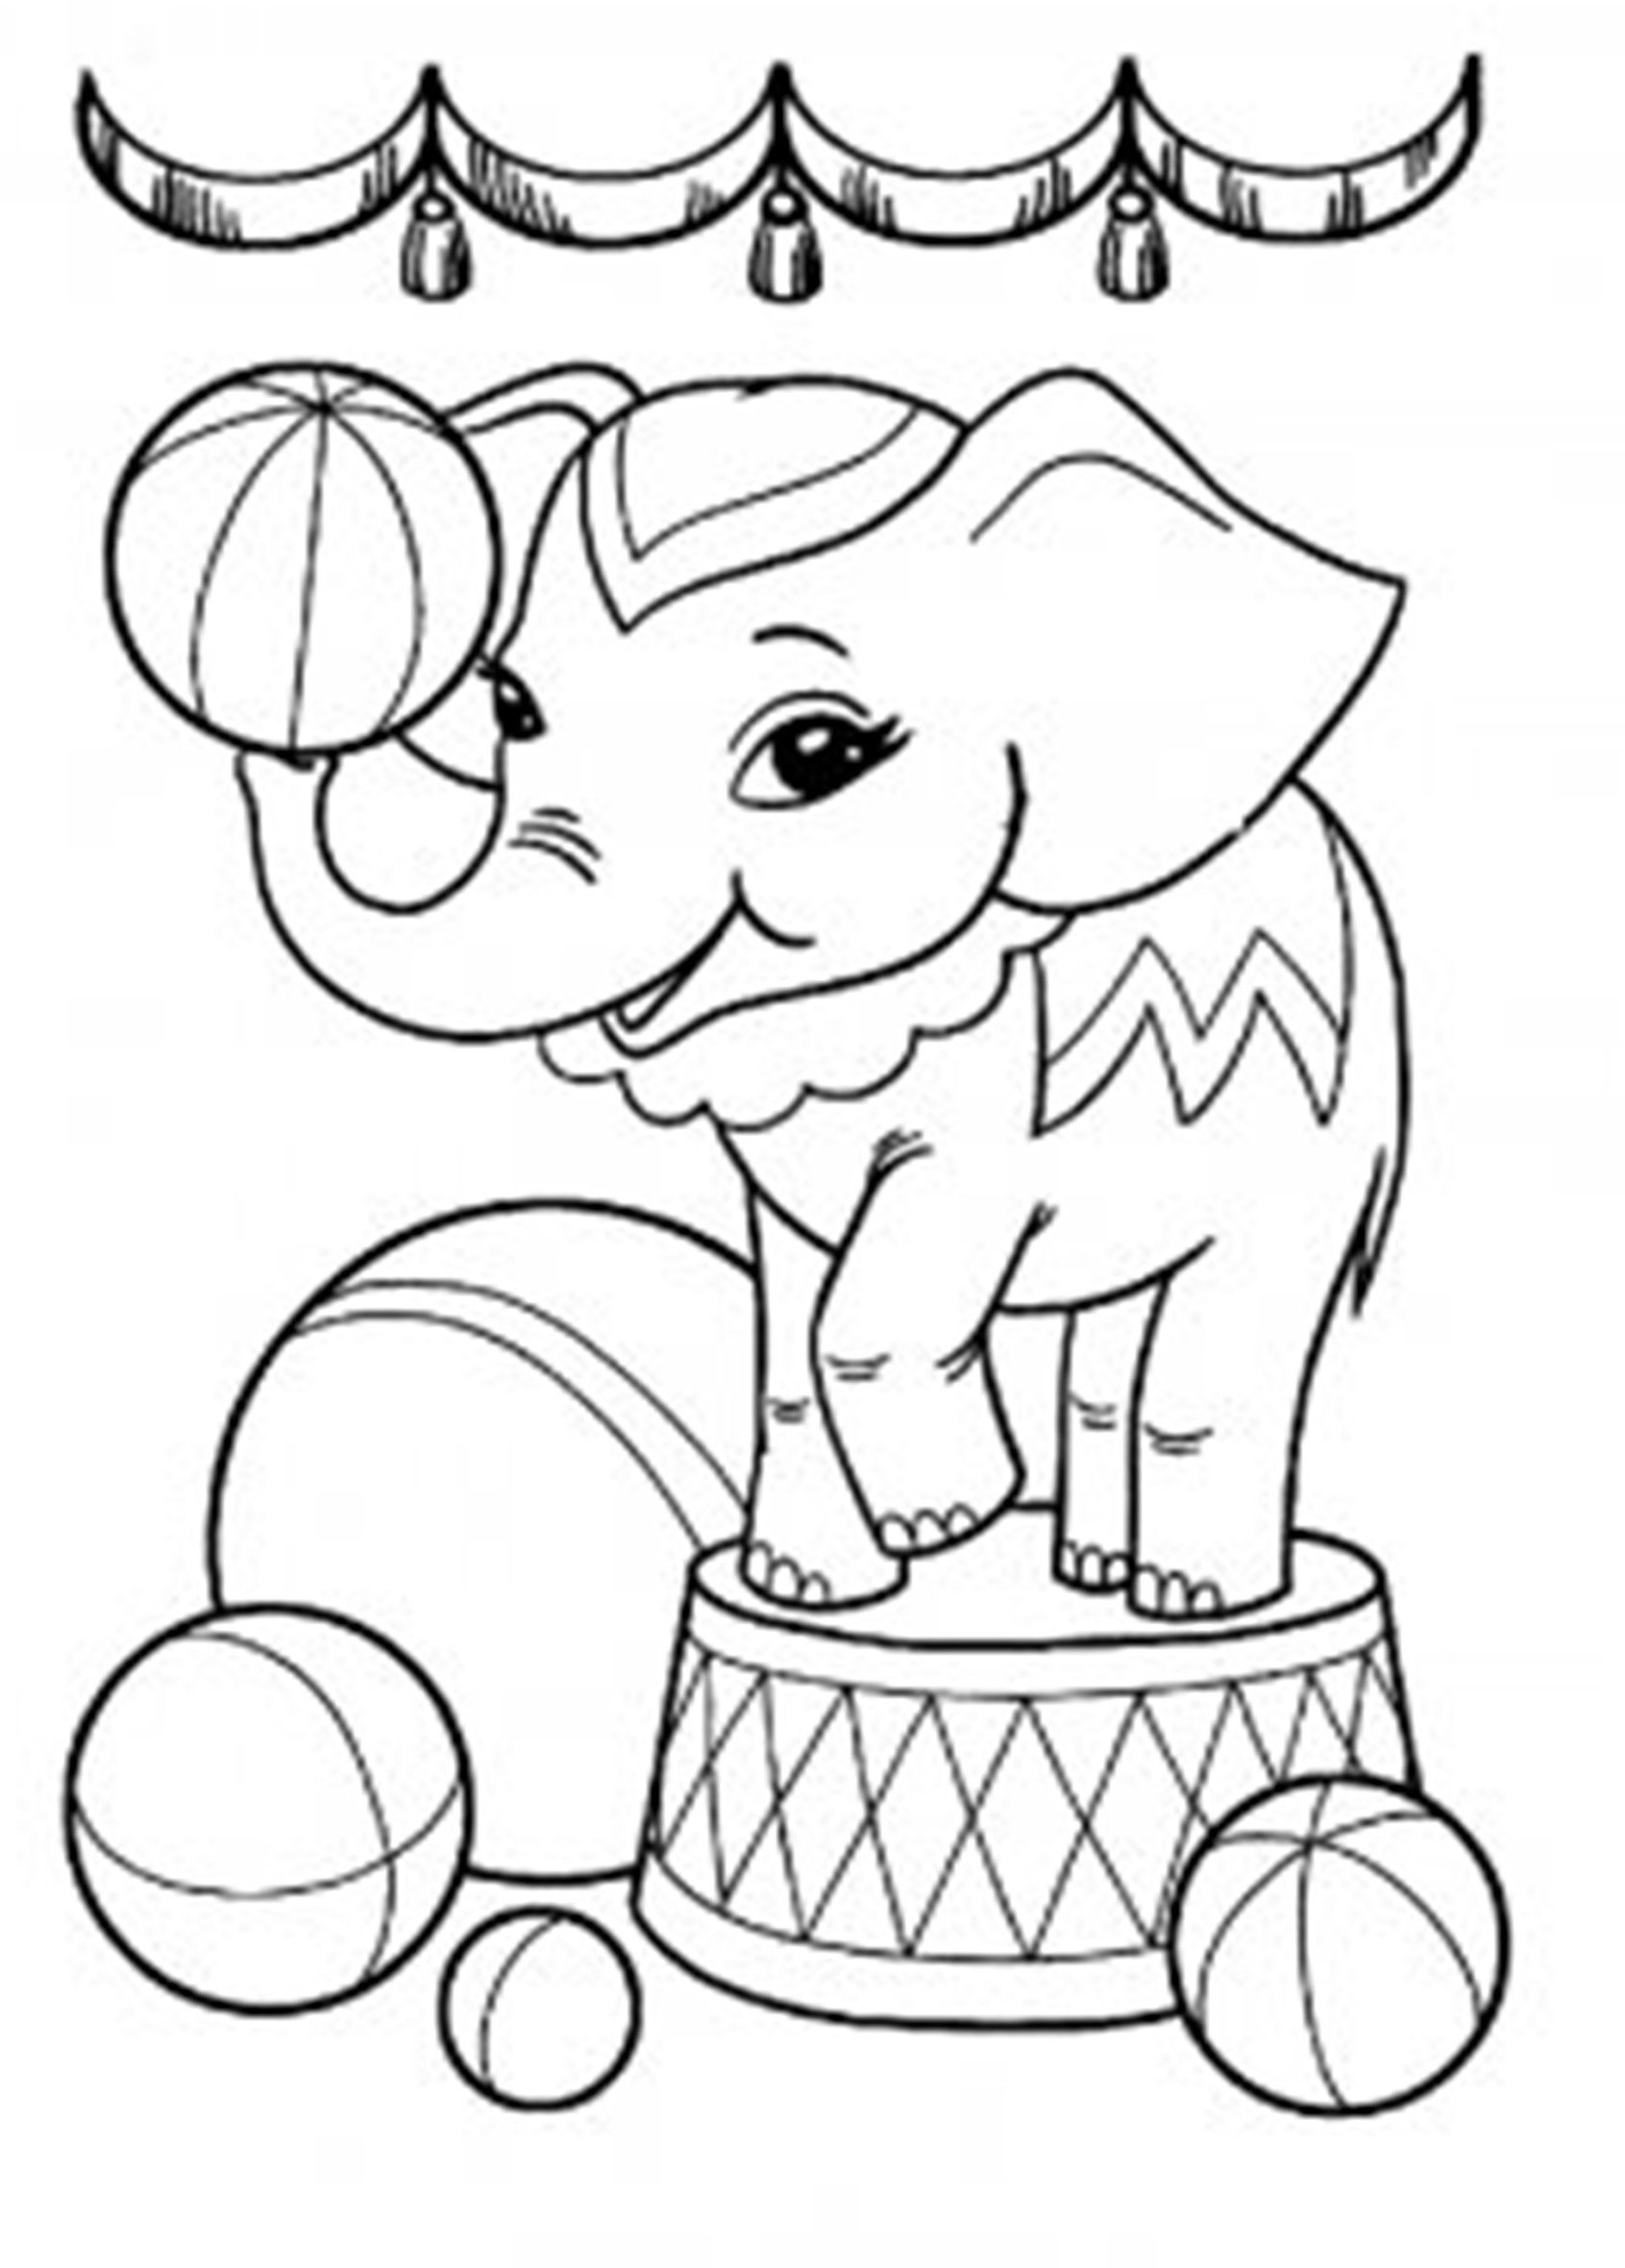 731 Animal Coloring Sheet Coloring Pages For Kids for Kids